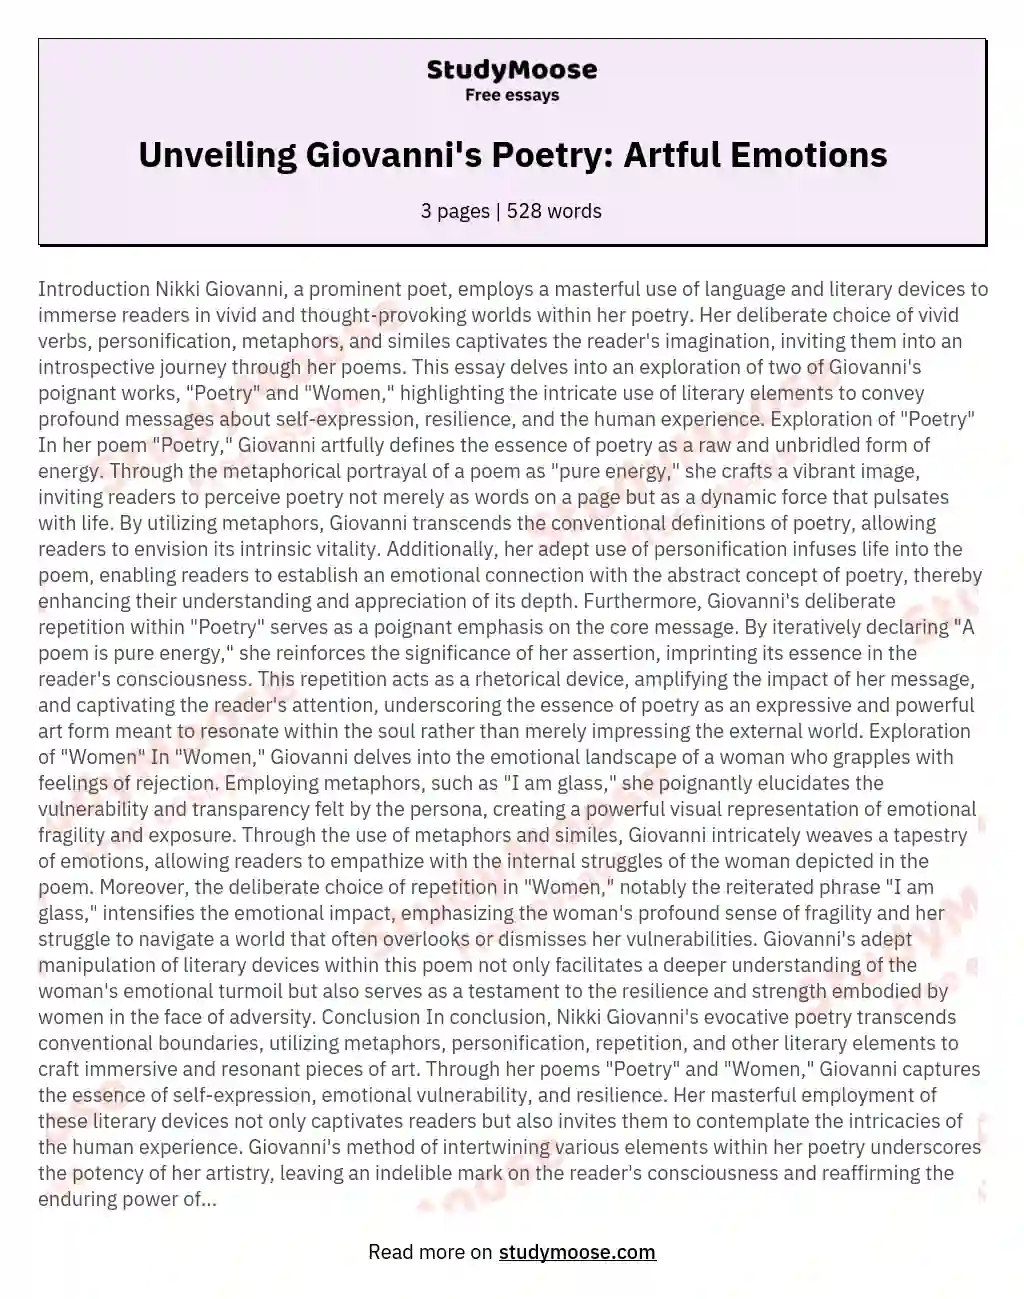 Unveiling Giovanni's Poetry: Artful Emotions essay